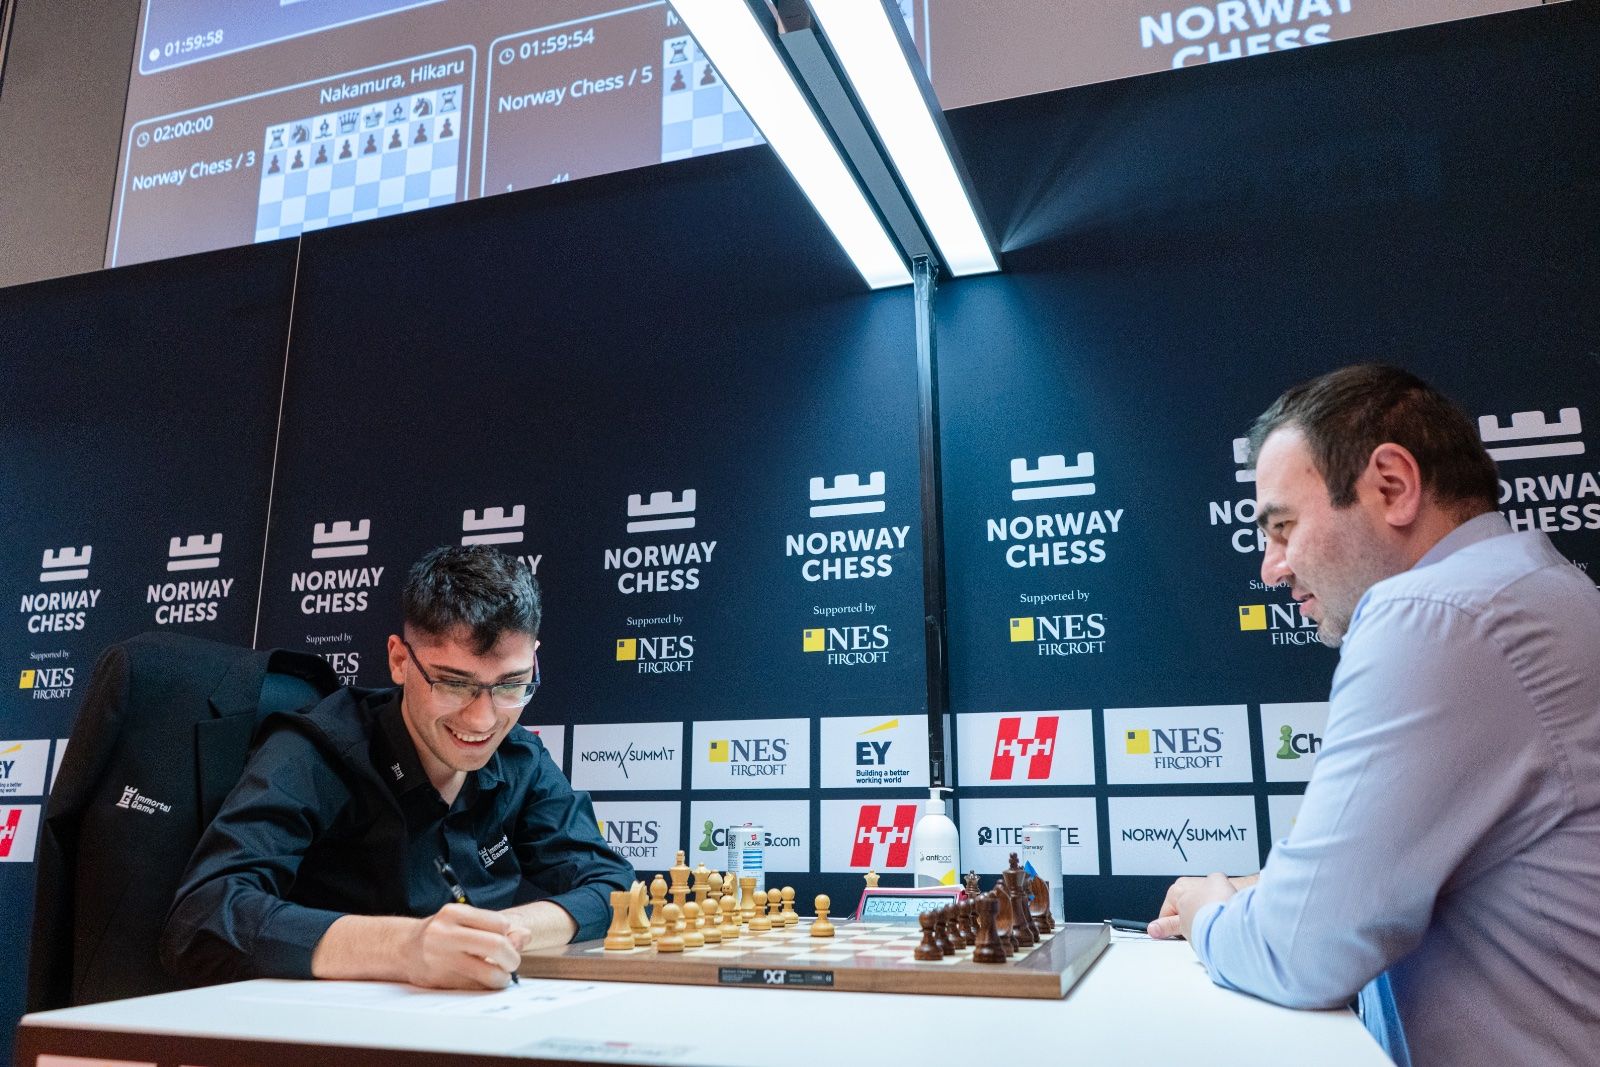 Abdusatturov crosses 2700 after the first round in Turkish League, becomes  the 4th junior with a live rating of above 2700 currently : r/chess